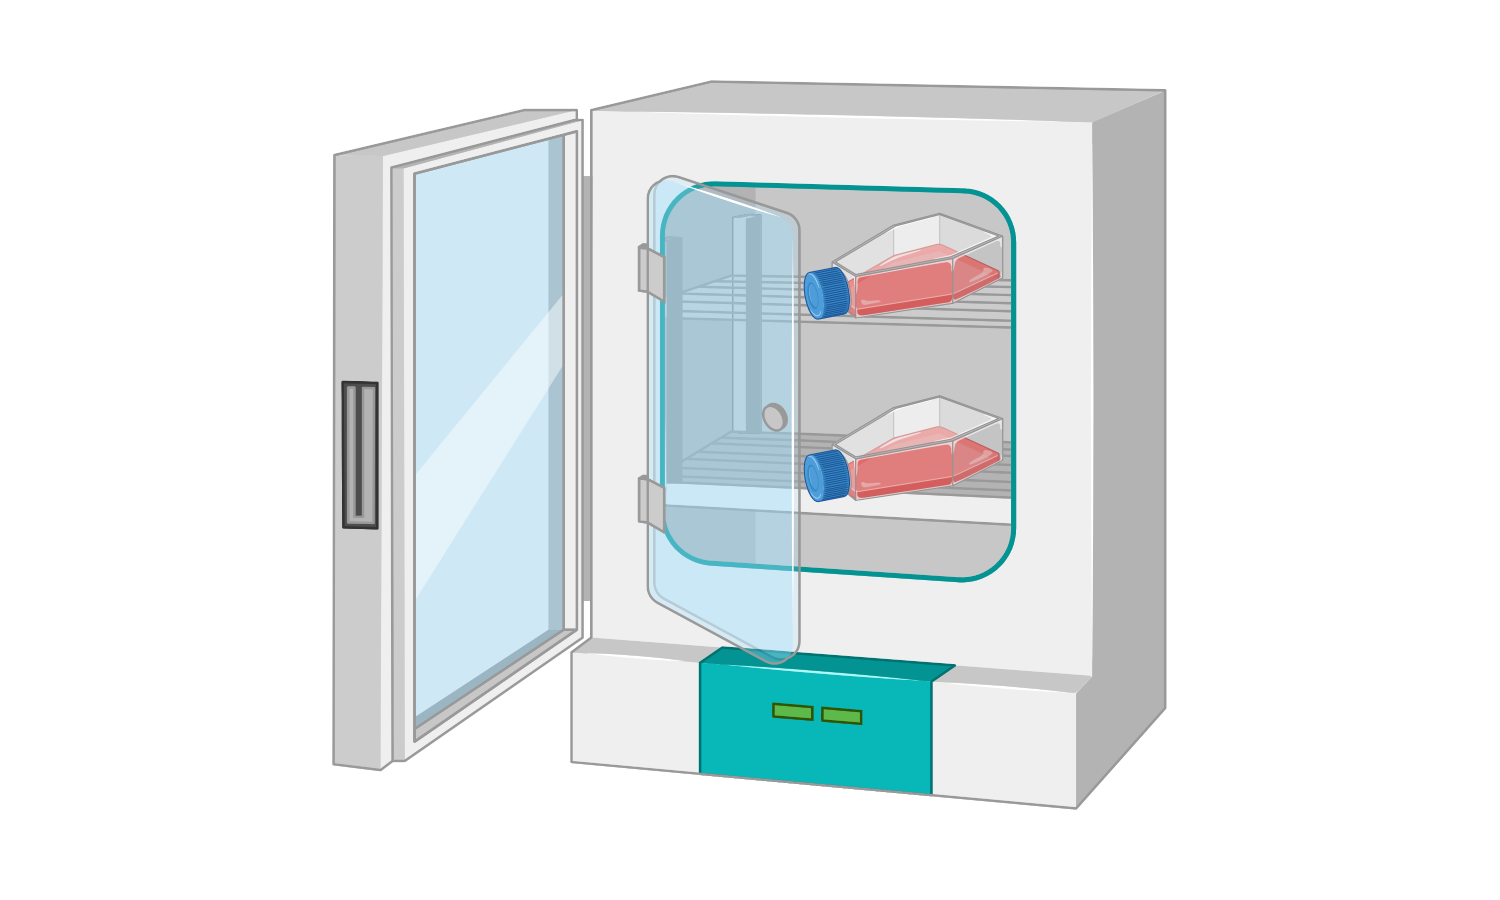 Open cell culture incubator with flasks on the shelves.